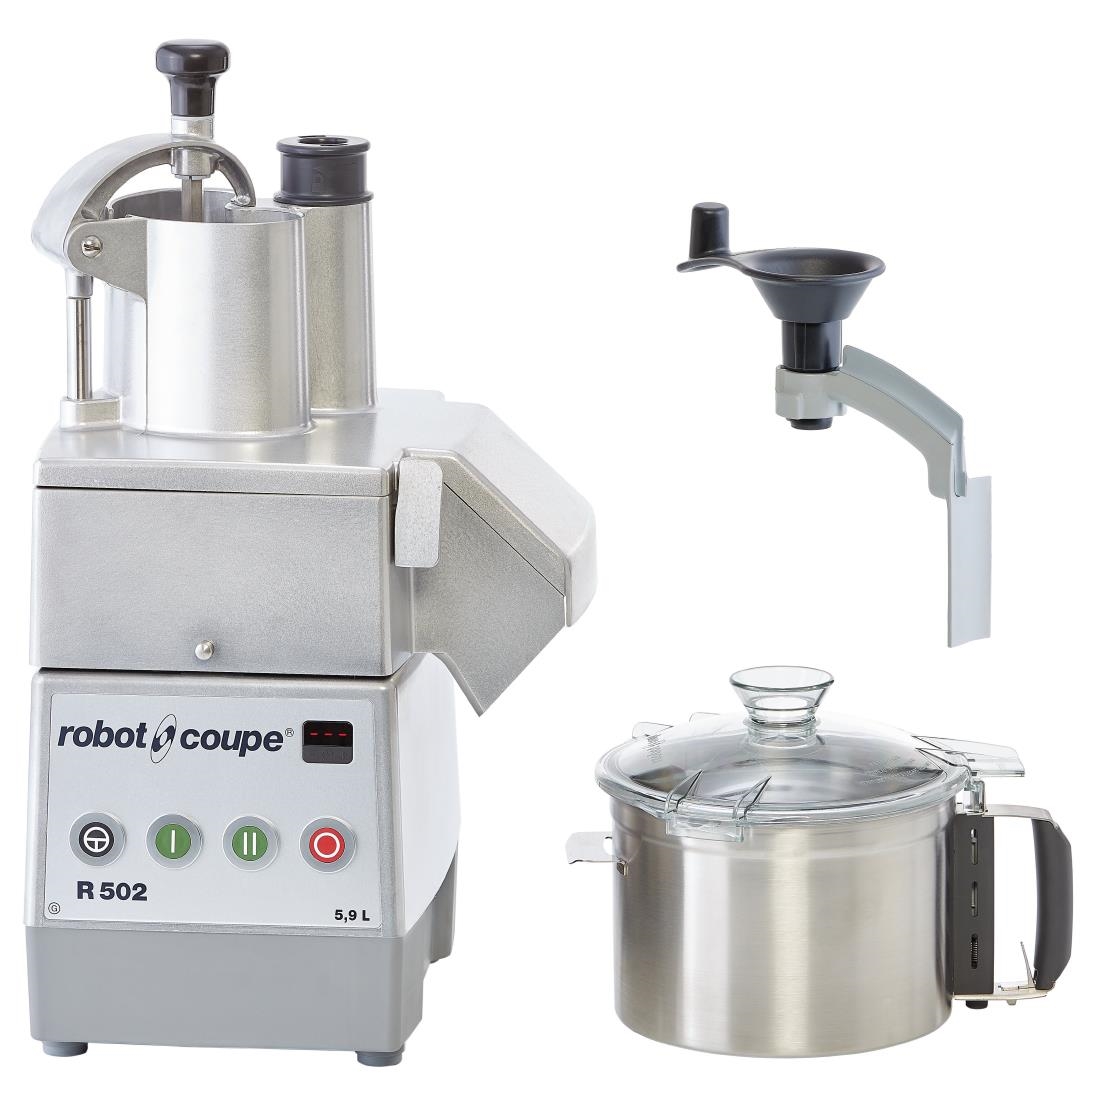 Robot Coupe R502G Food Processor Three Phase (FT077)